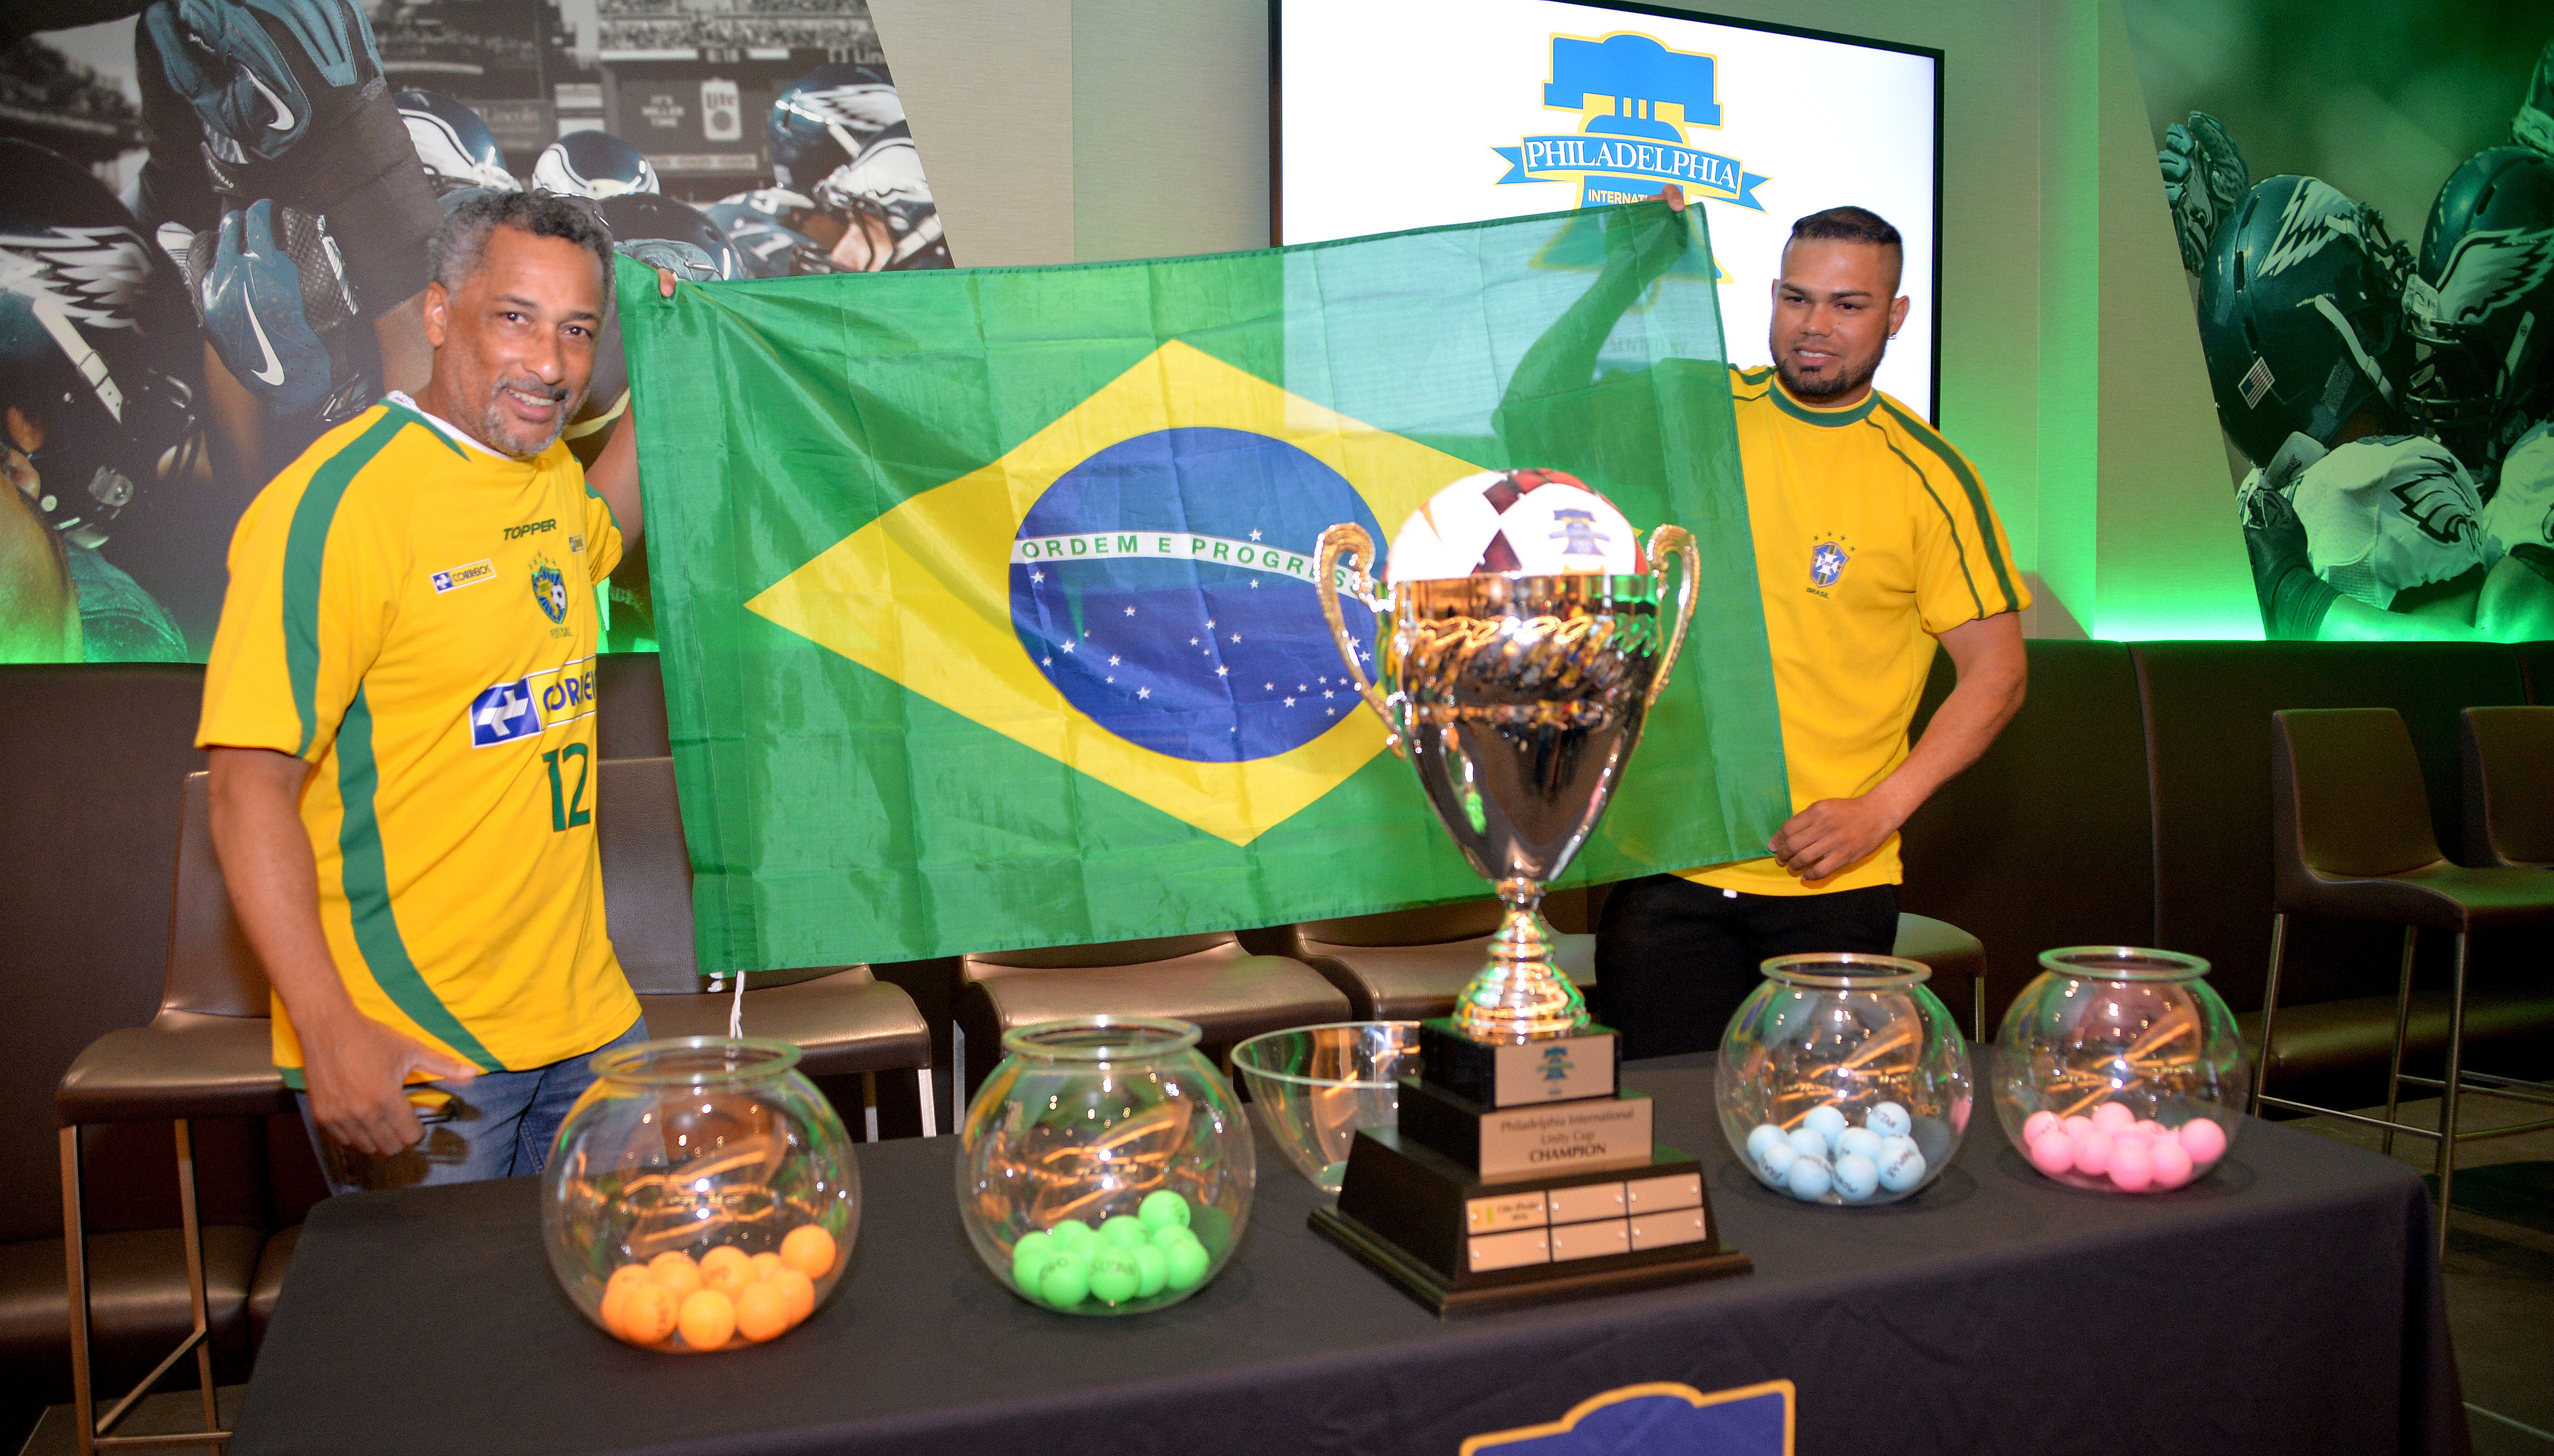 Adenilson Dos Santos and Andre Butra are excited that their home country of Brazil will be participating in the Philadelphia International Unity Cup.  Photo: Peter Fitzpatrick/AL DIA News